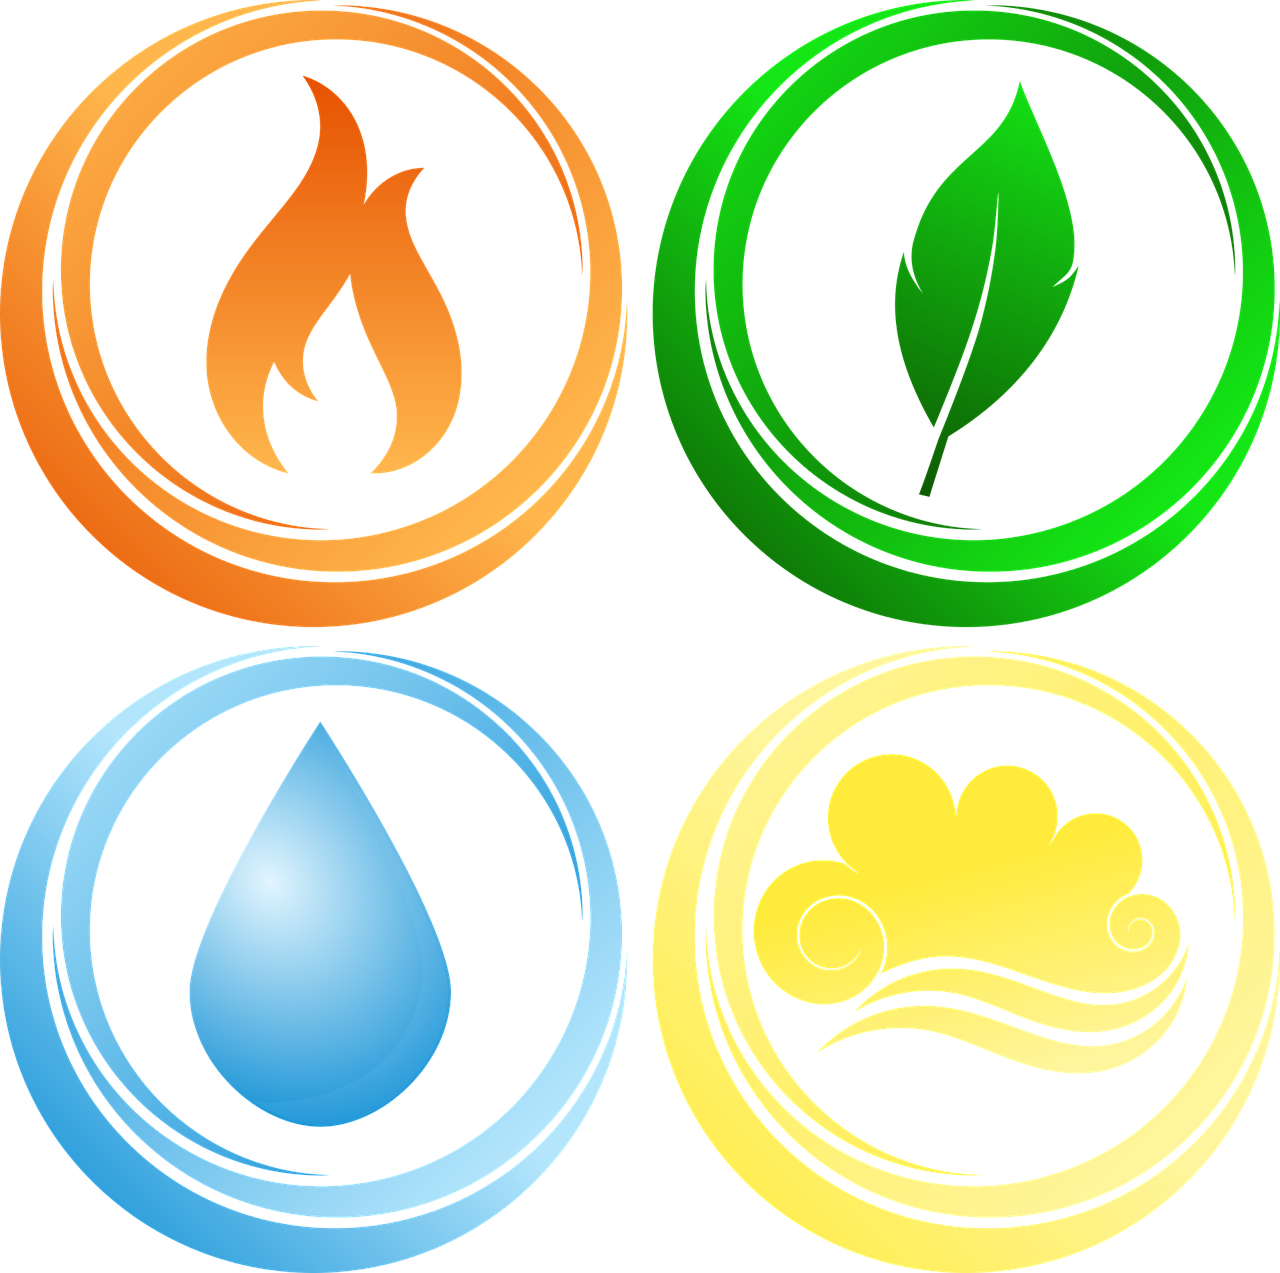 A Group Of Four Elements In Circles